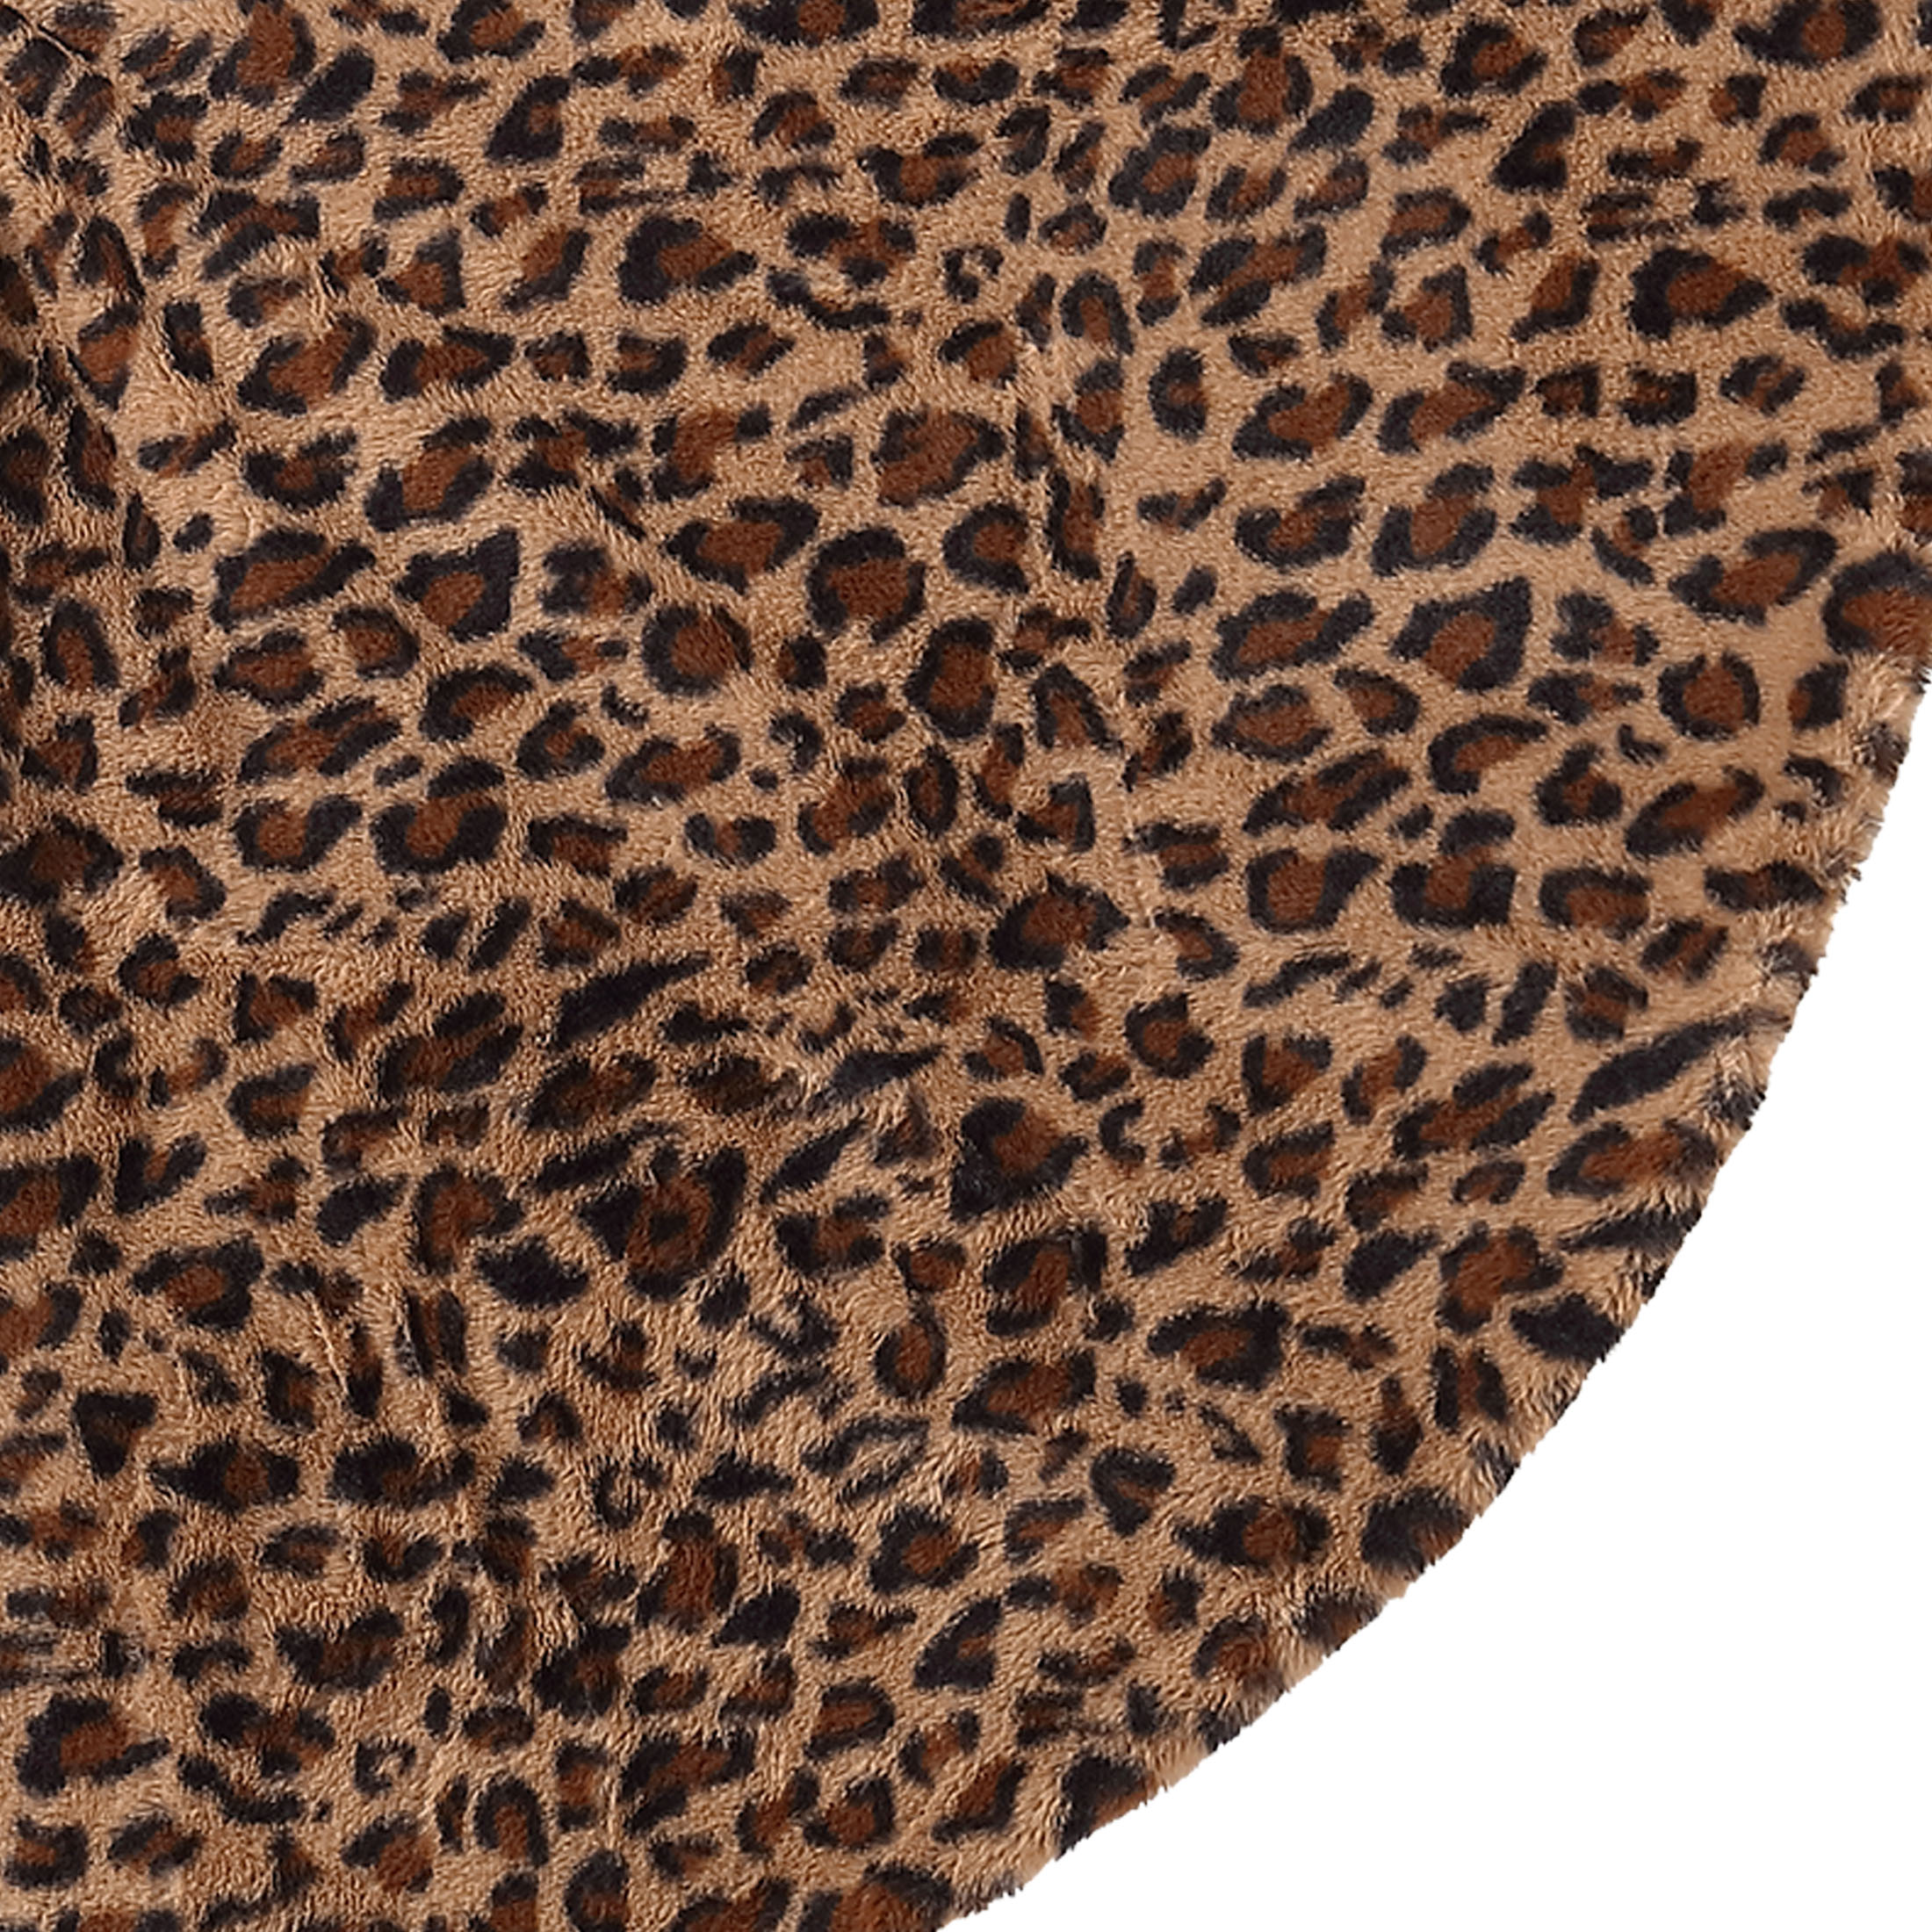 Holiday Time, Rabbit Faux Fur Leopard Print Tree Skirt, 56" - image 4 of 5